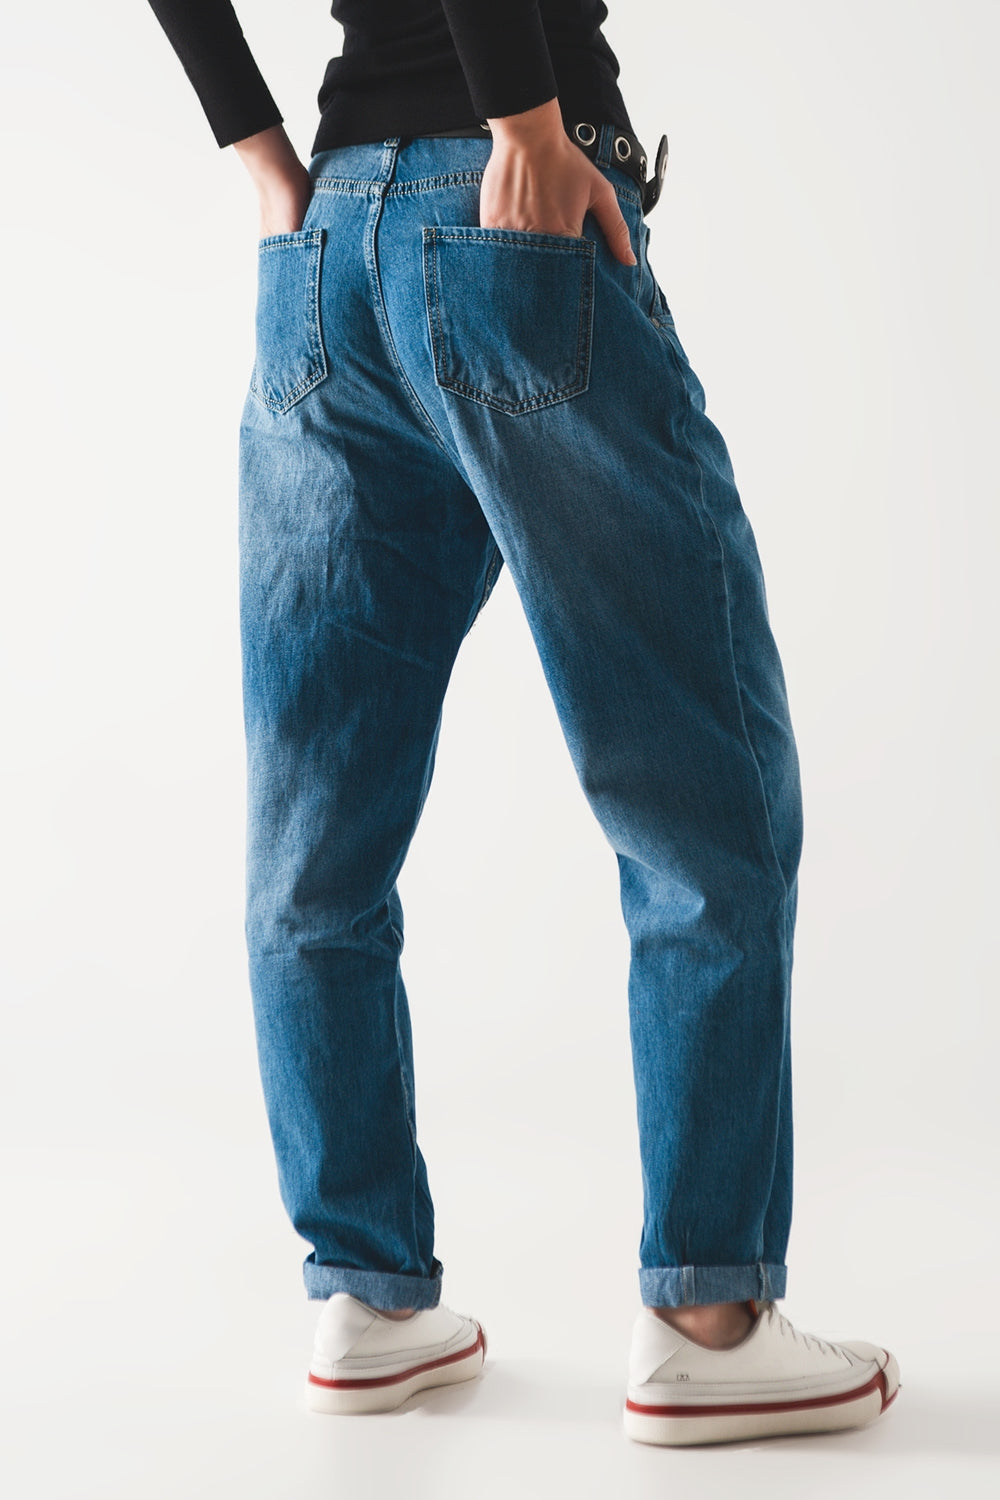 Cotton skater tapered carpenter jeans in mid wash - Szua Store